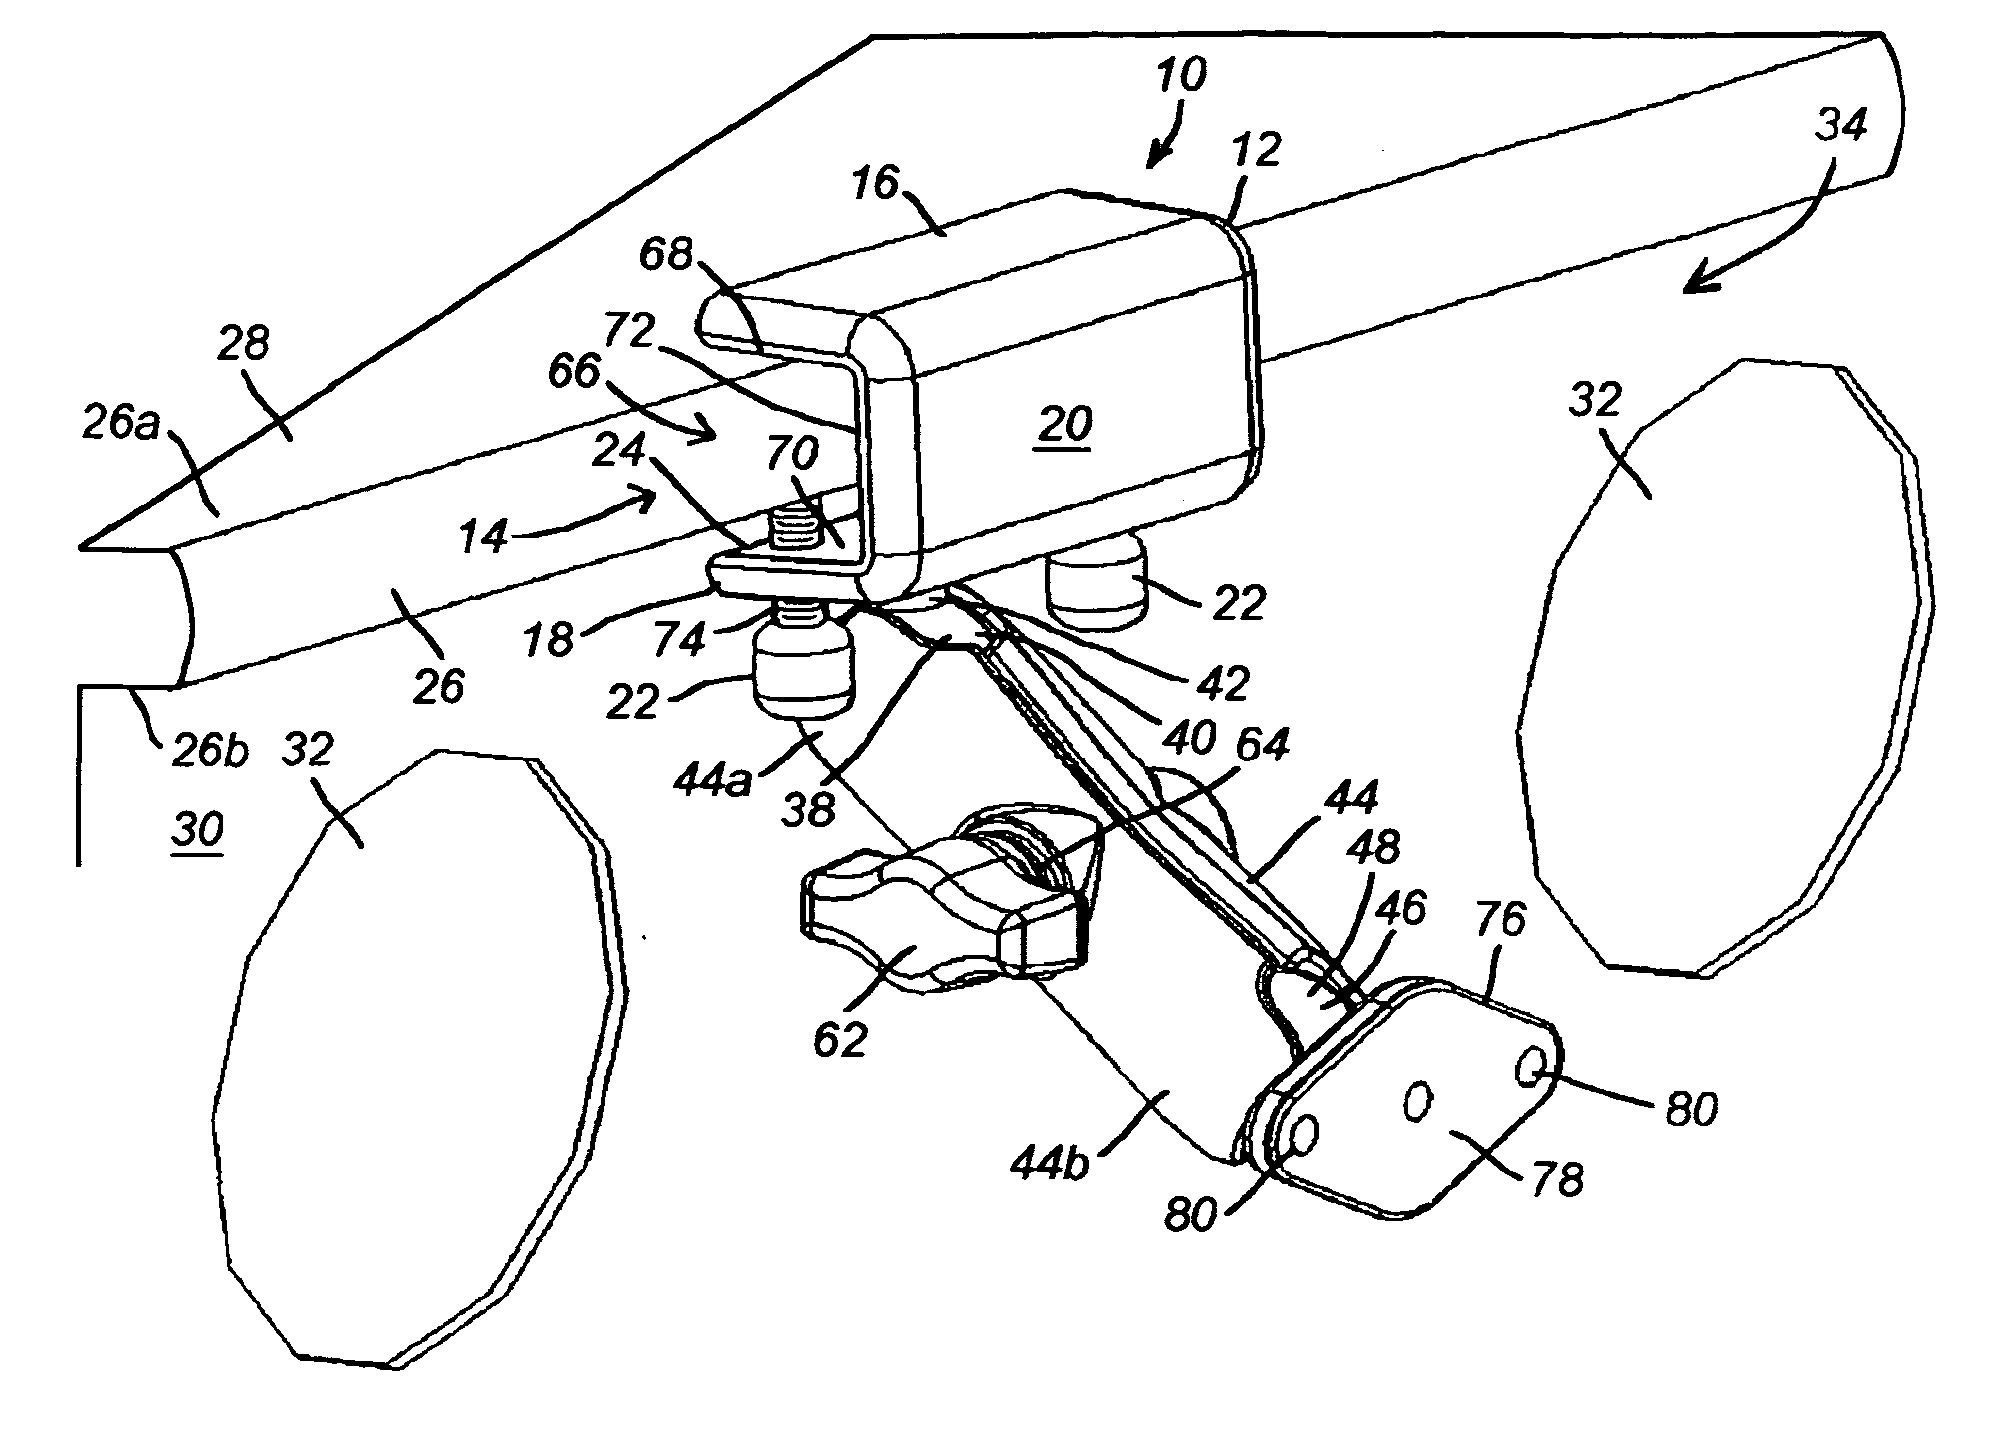 Portable aviation clamp